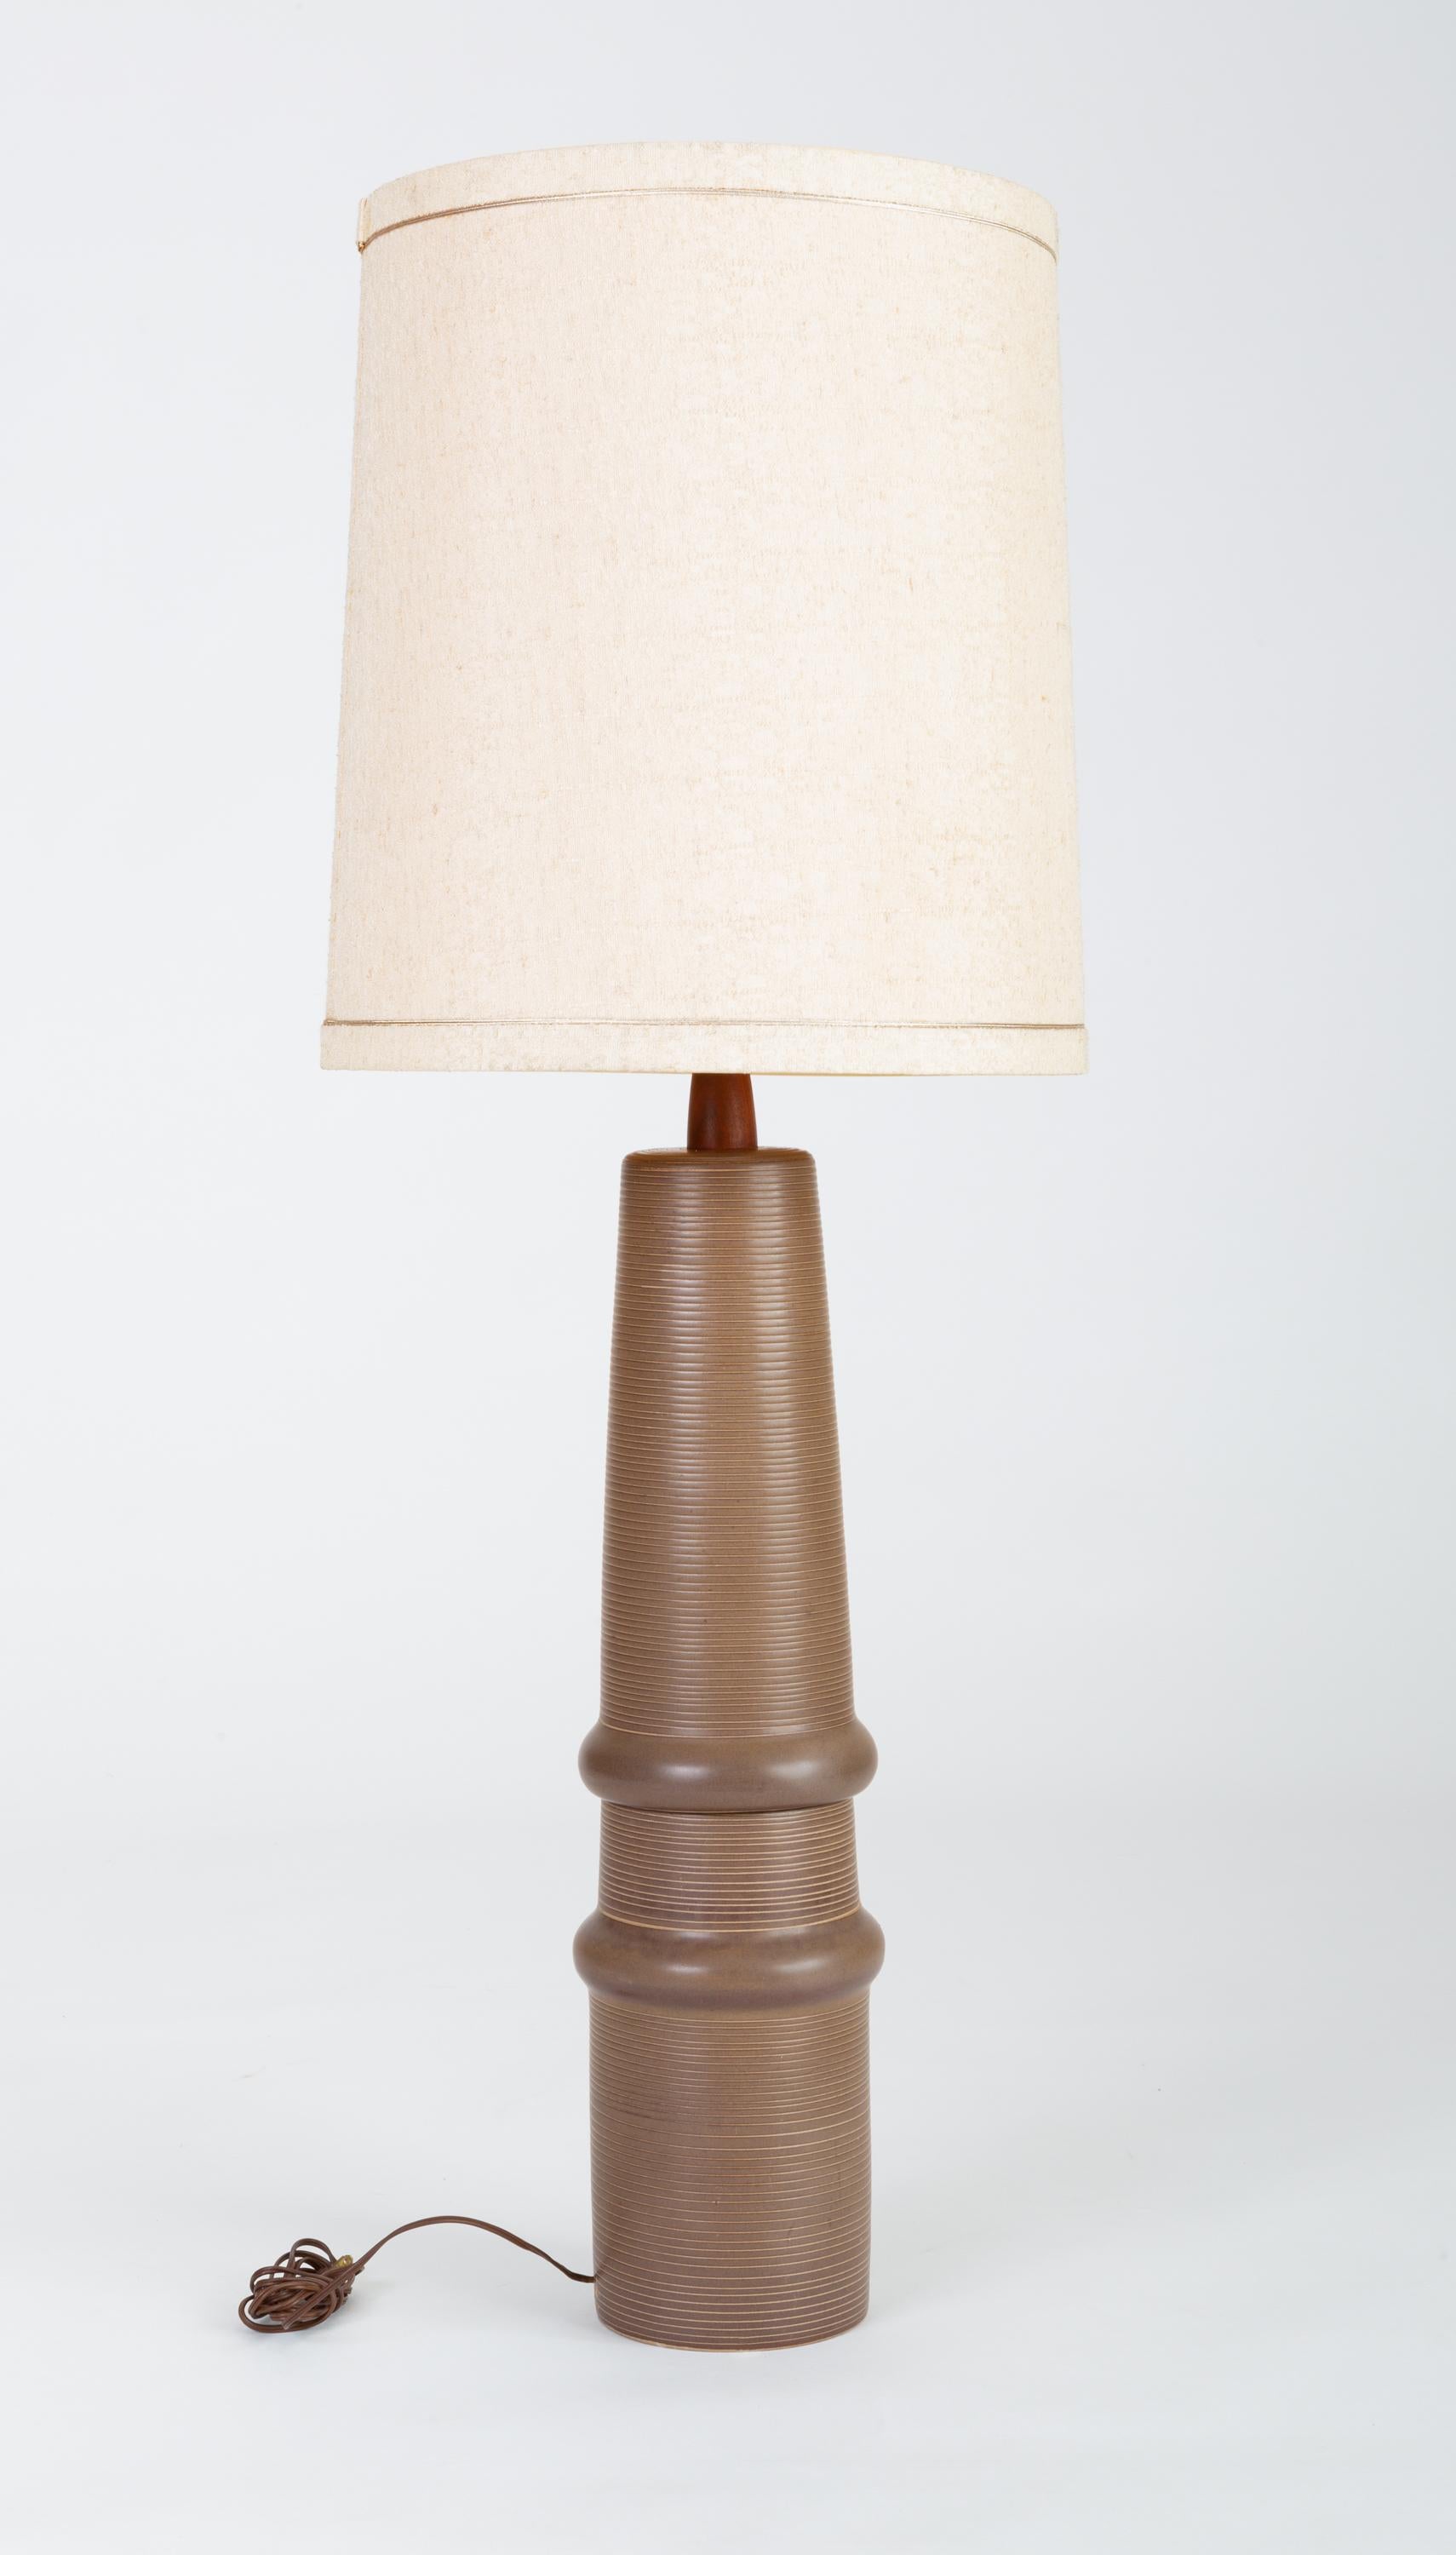 A tall ceramic lamp by husband-and-wife design team Gordon and Jane Martz. Produced by their family company, Marshall Studios in Indiana beginning in 1957, the Model 172 lamp has an organic form with a ribbed texture produced by horizontal incising,